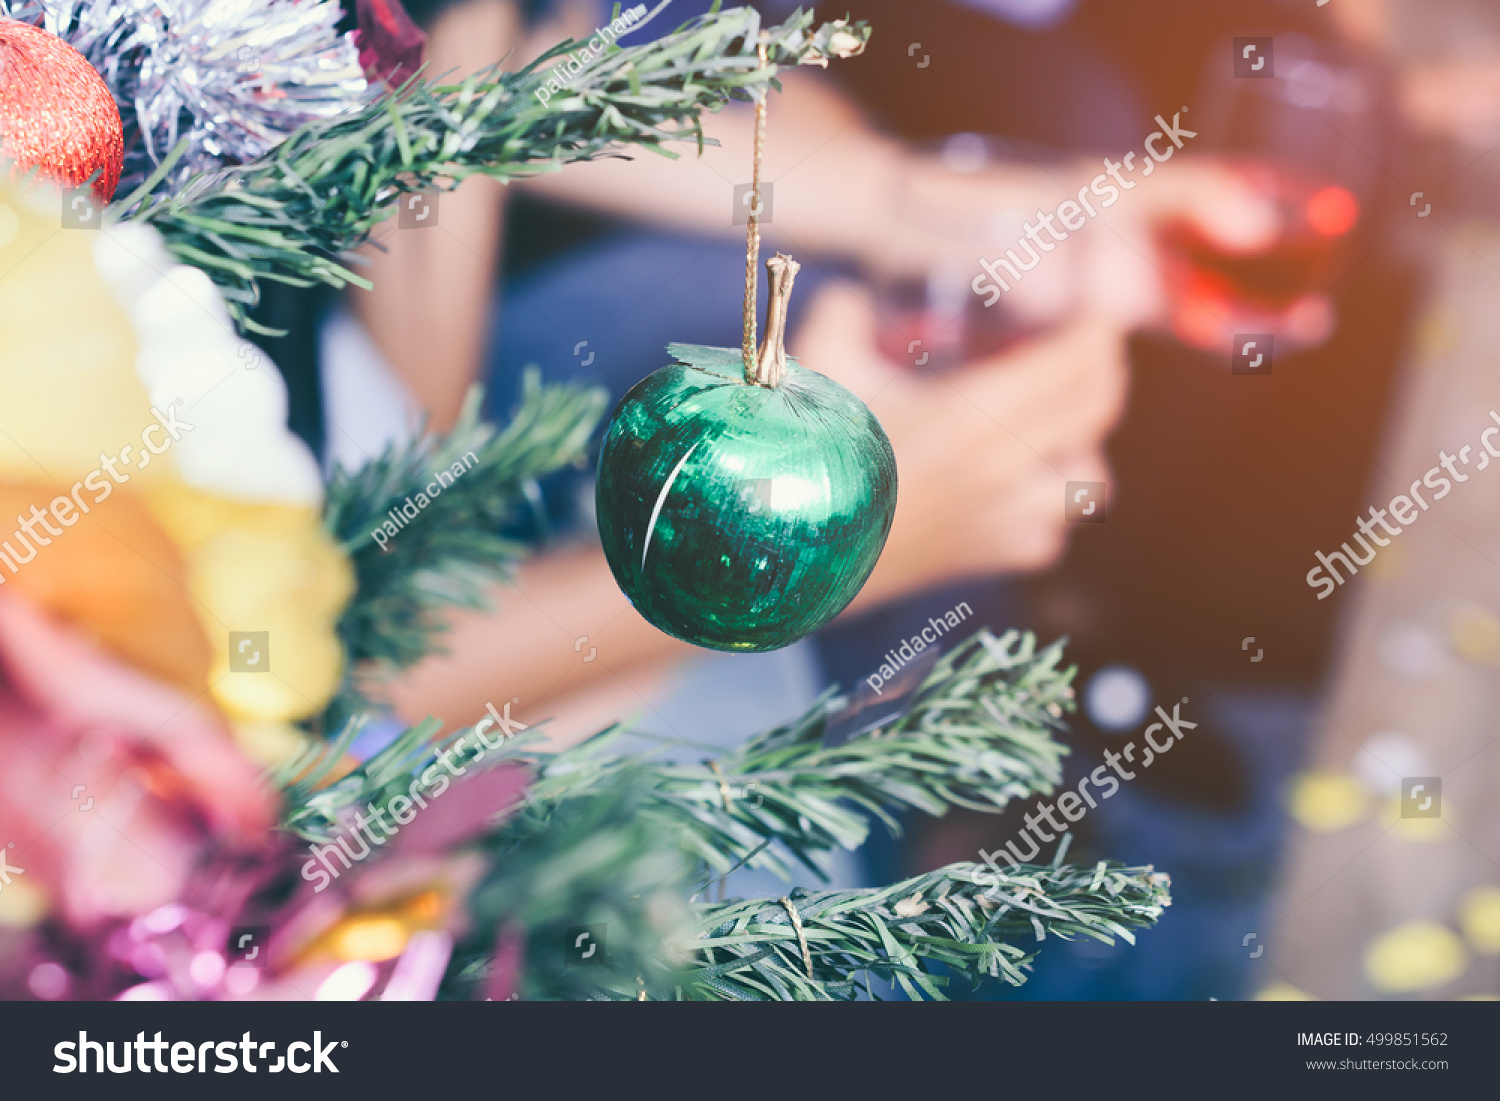  Christmas tree and Christmas decorations with hand holding the glass of red wine background
 #499851562